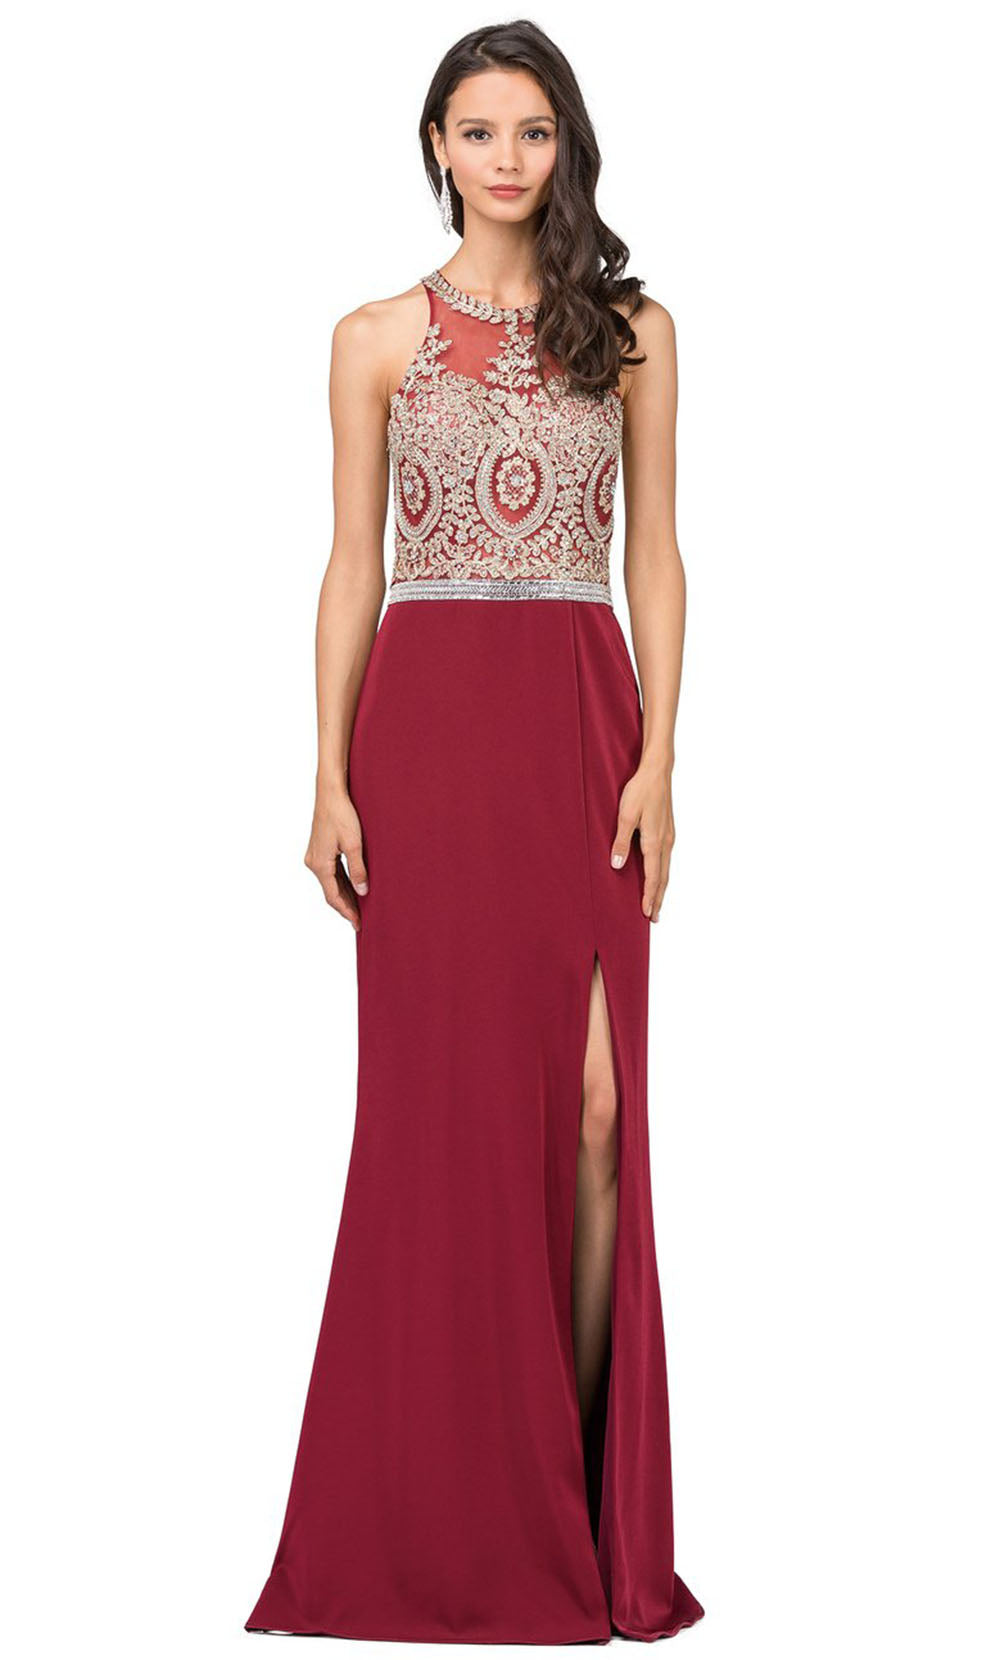 Dancing Queen - 9702 Embroidered Halter Sheath Dress With Slit In Red and Gold